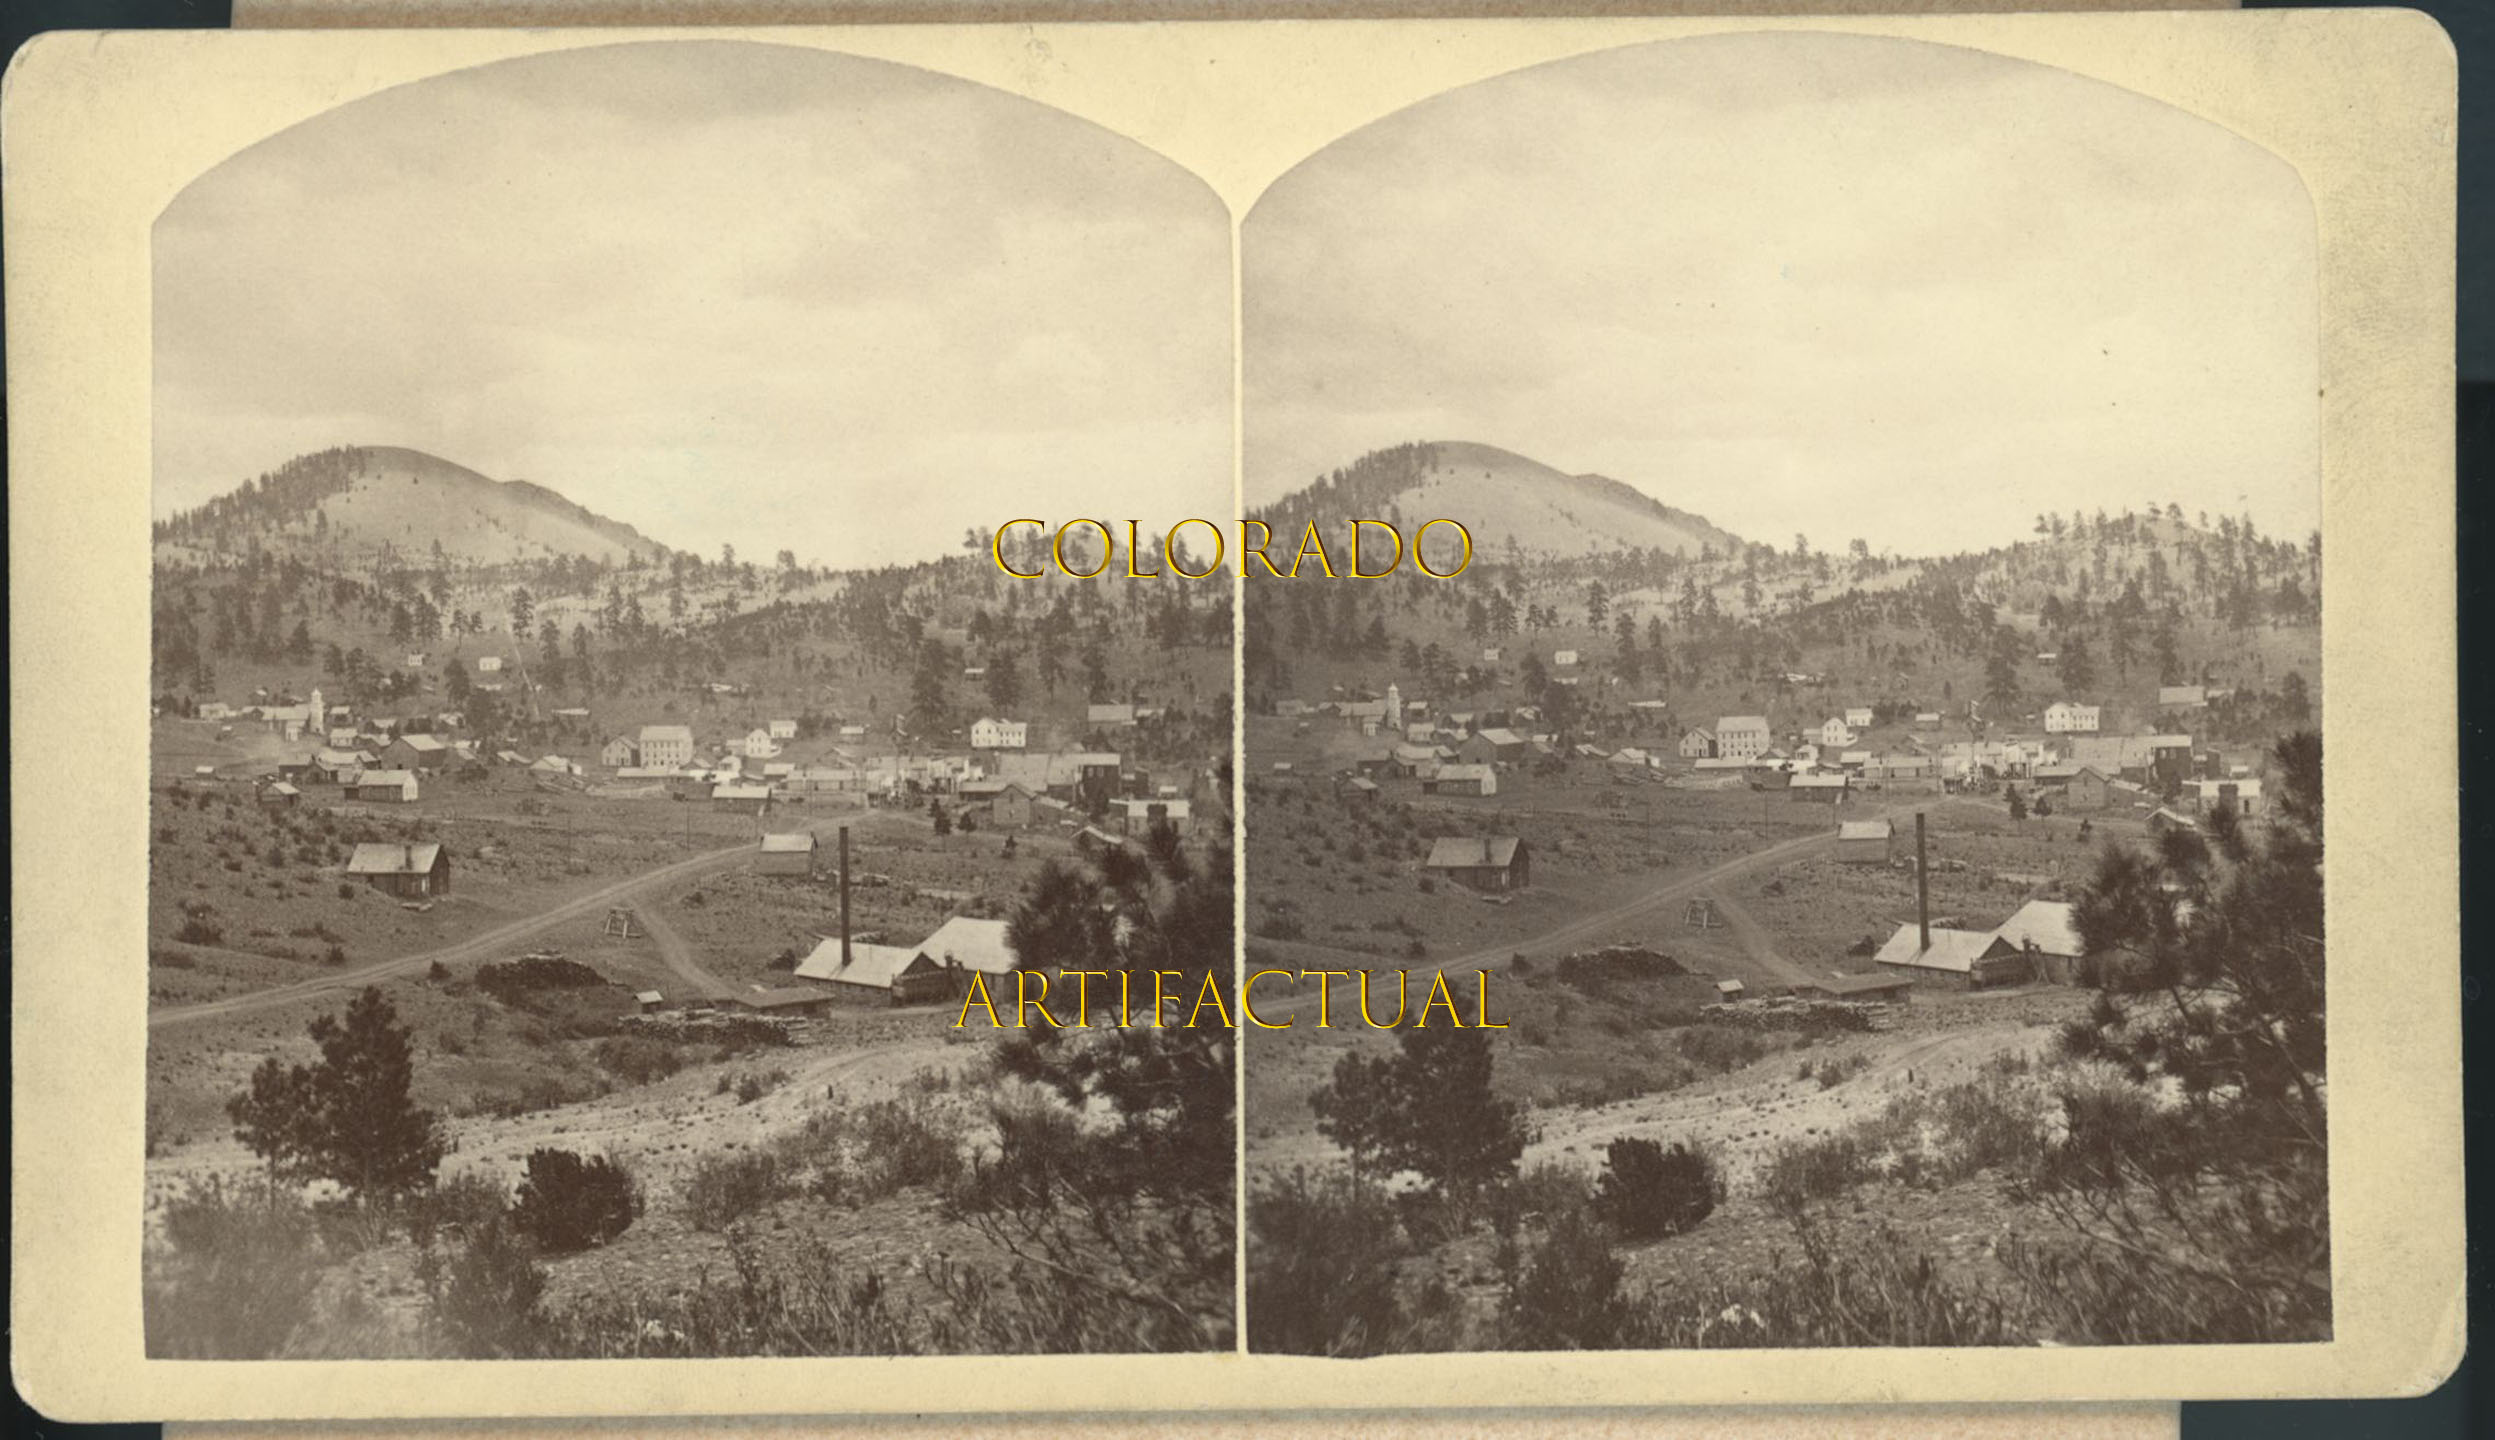 TOWN OF ROSITA HARDSCRABBLE MINING DISTRICT CUSTER COUNTY COLORADO stereo view photograph Charles E. Emery 1880